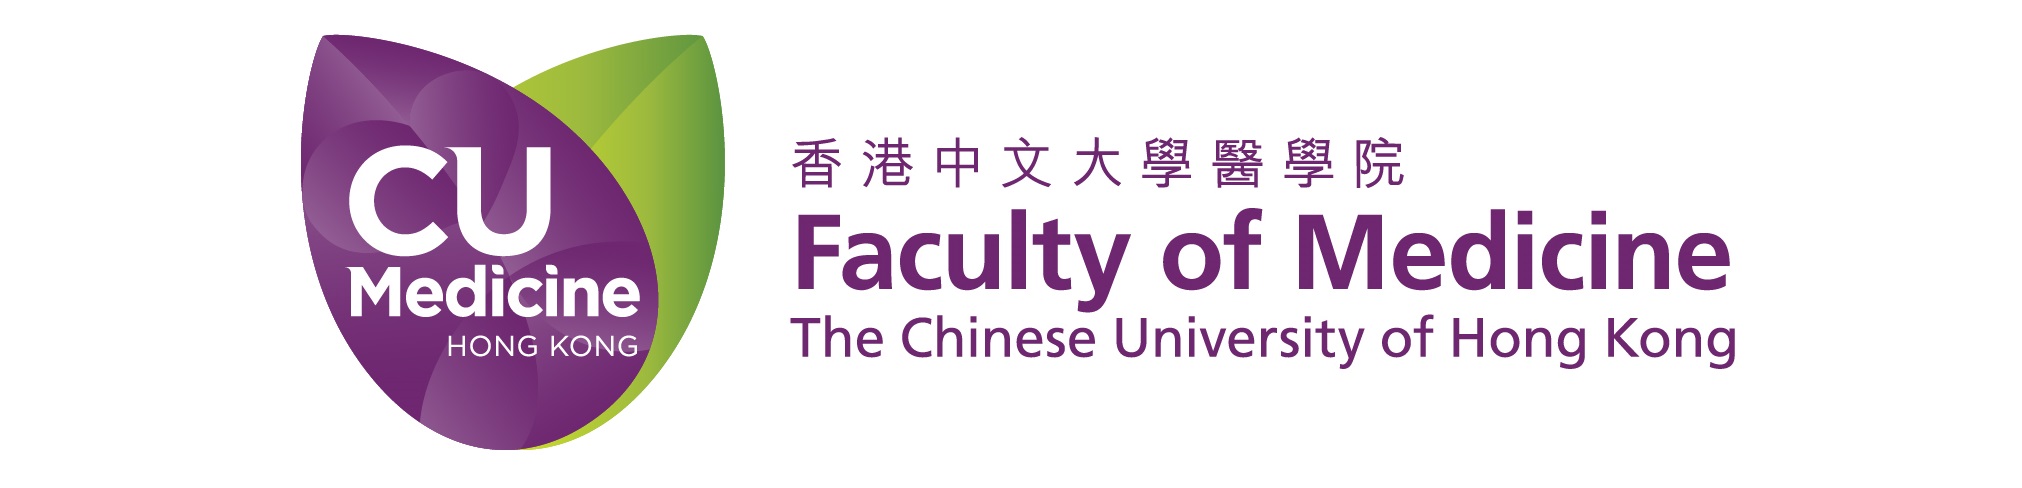 Faculty of Medicine, The Chinese University of Hong Kong